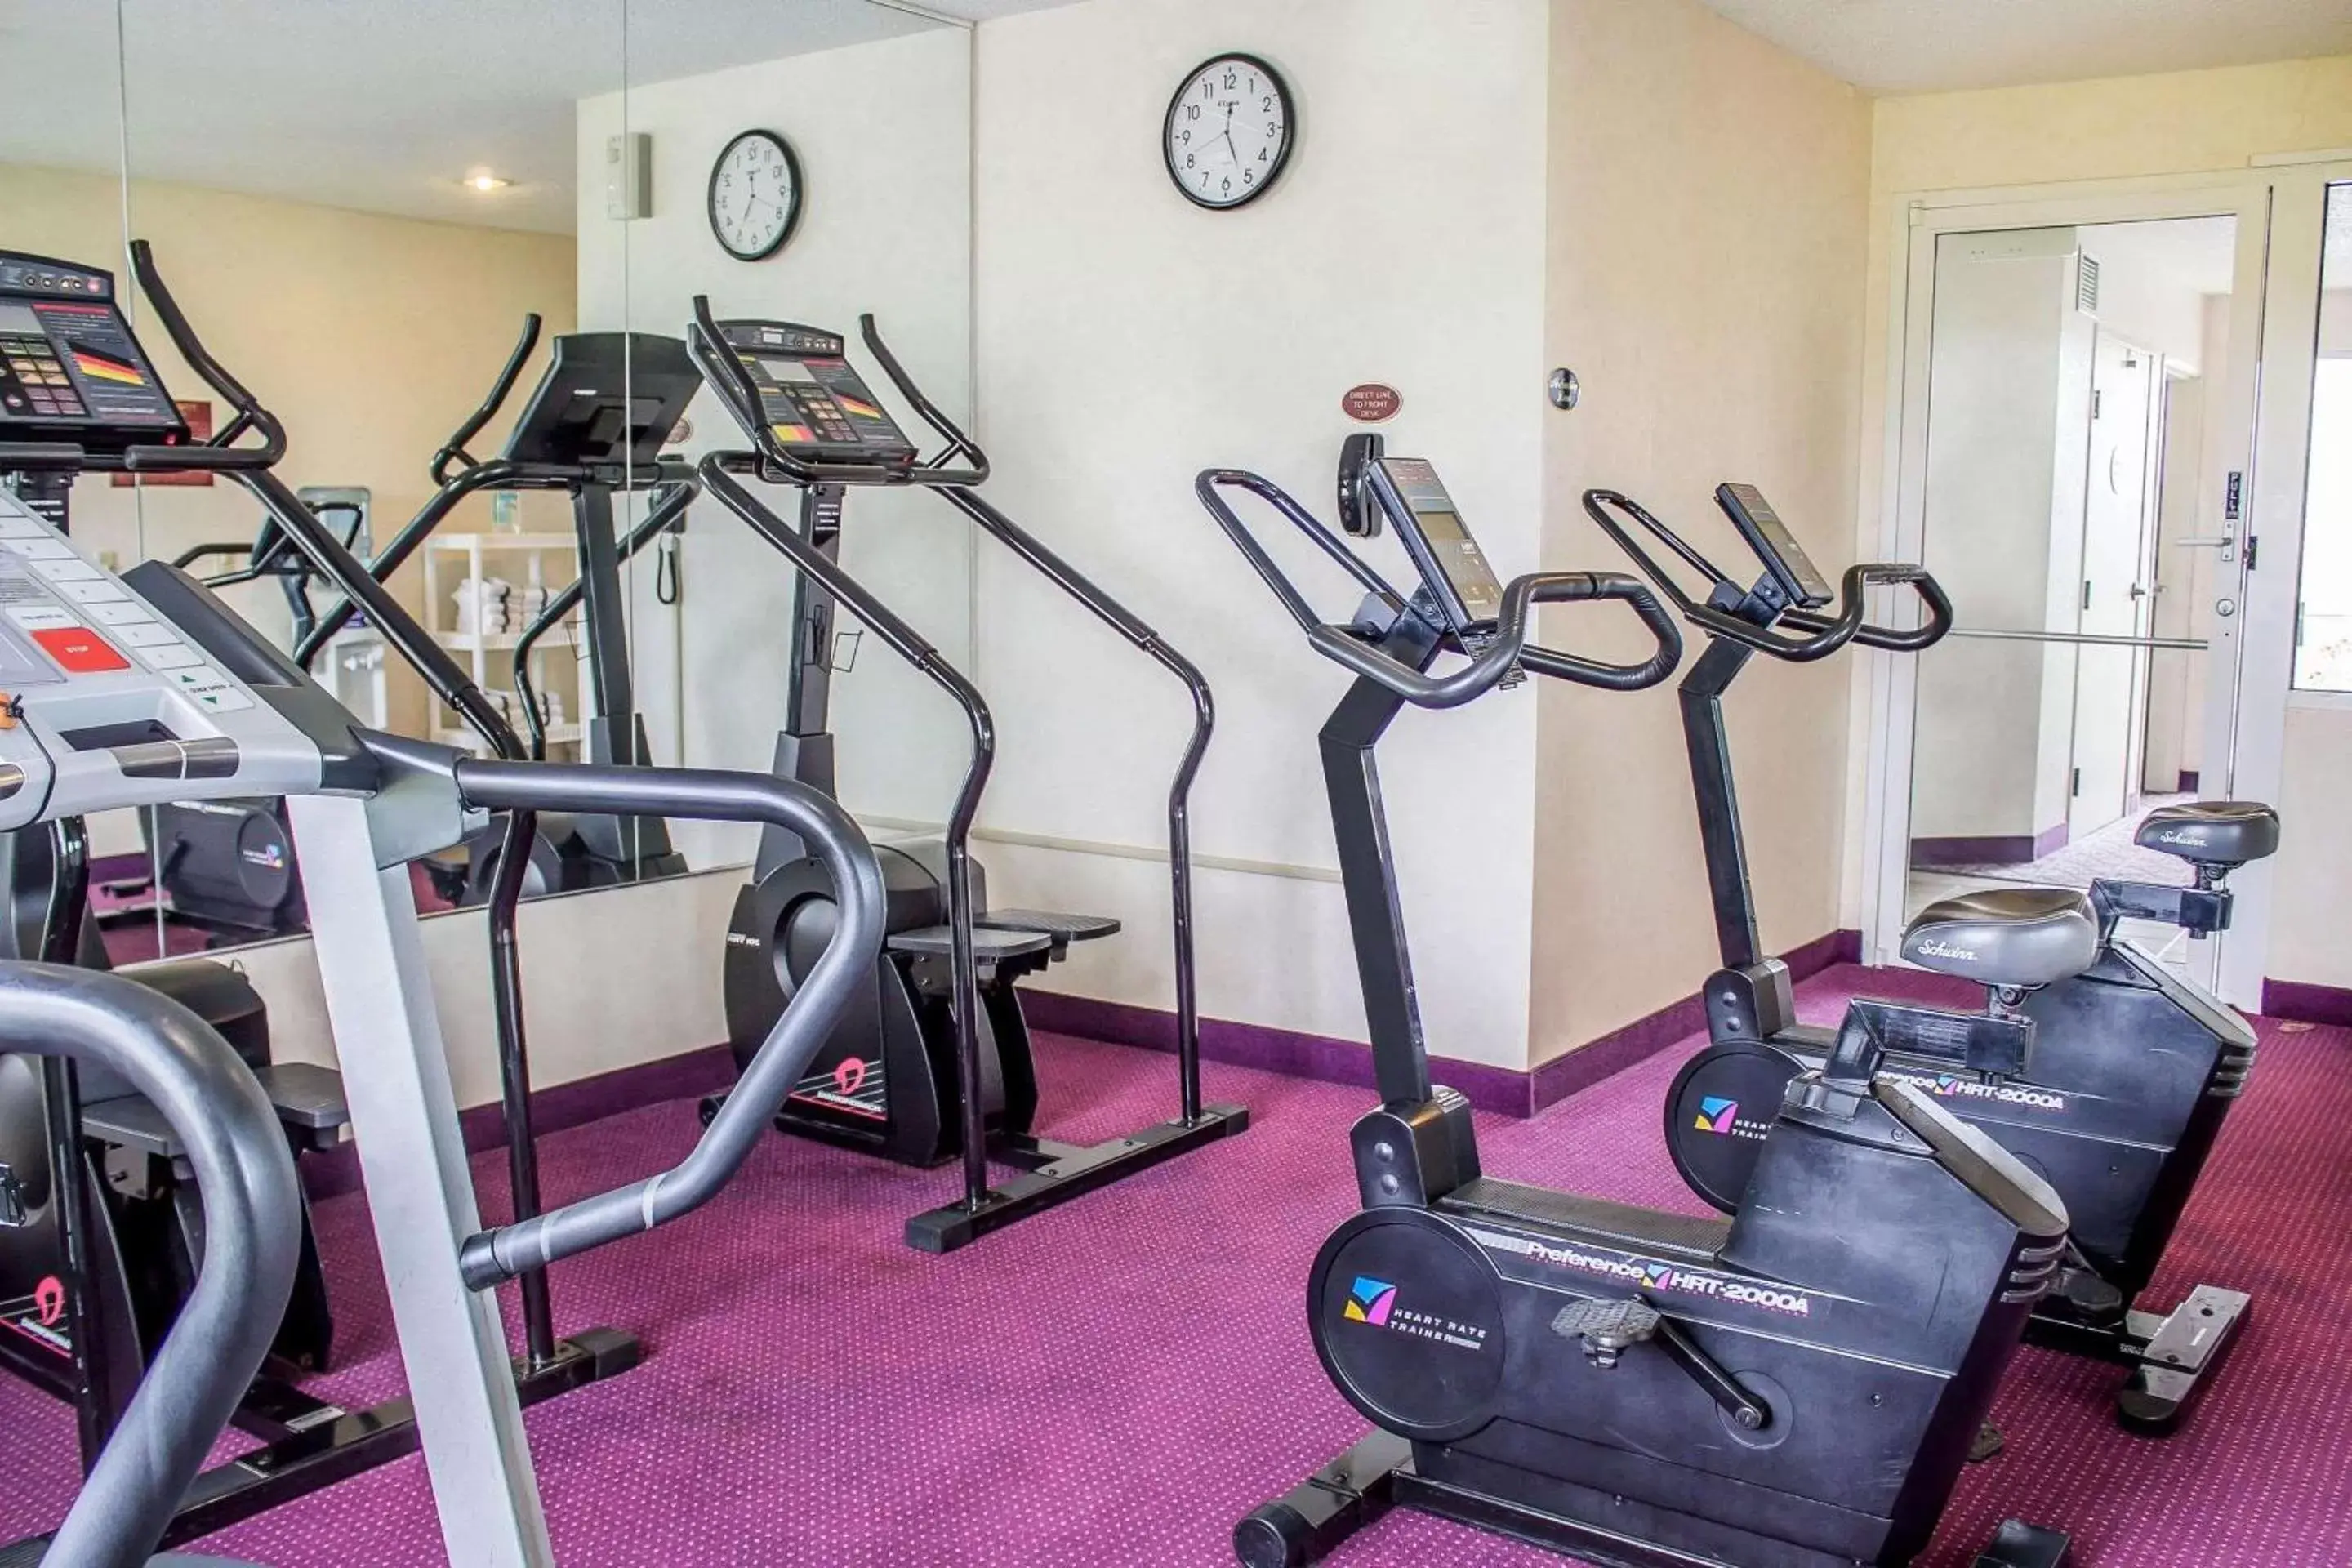 Fitness centre/facilities, Fitness Center/Facilities in Rodeway Inn Abbotsford